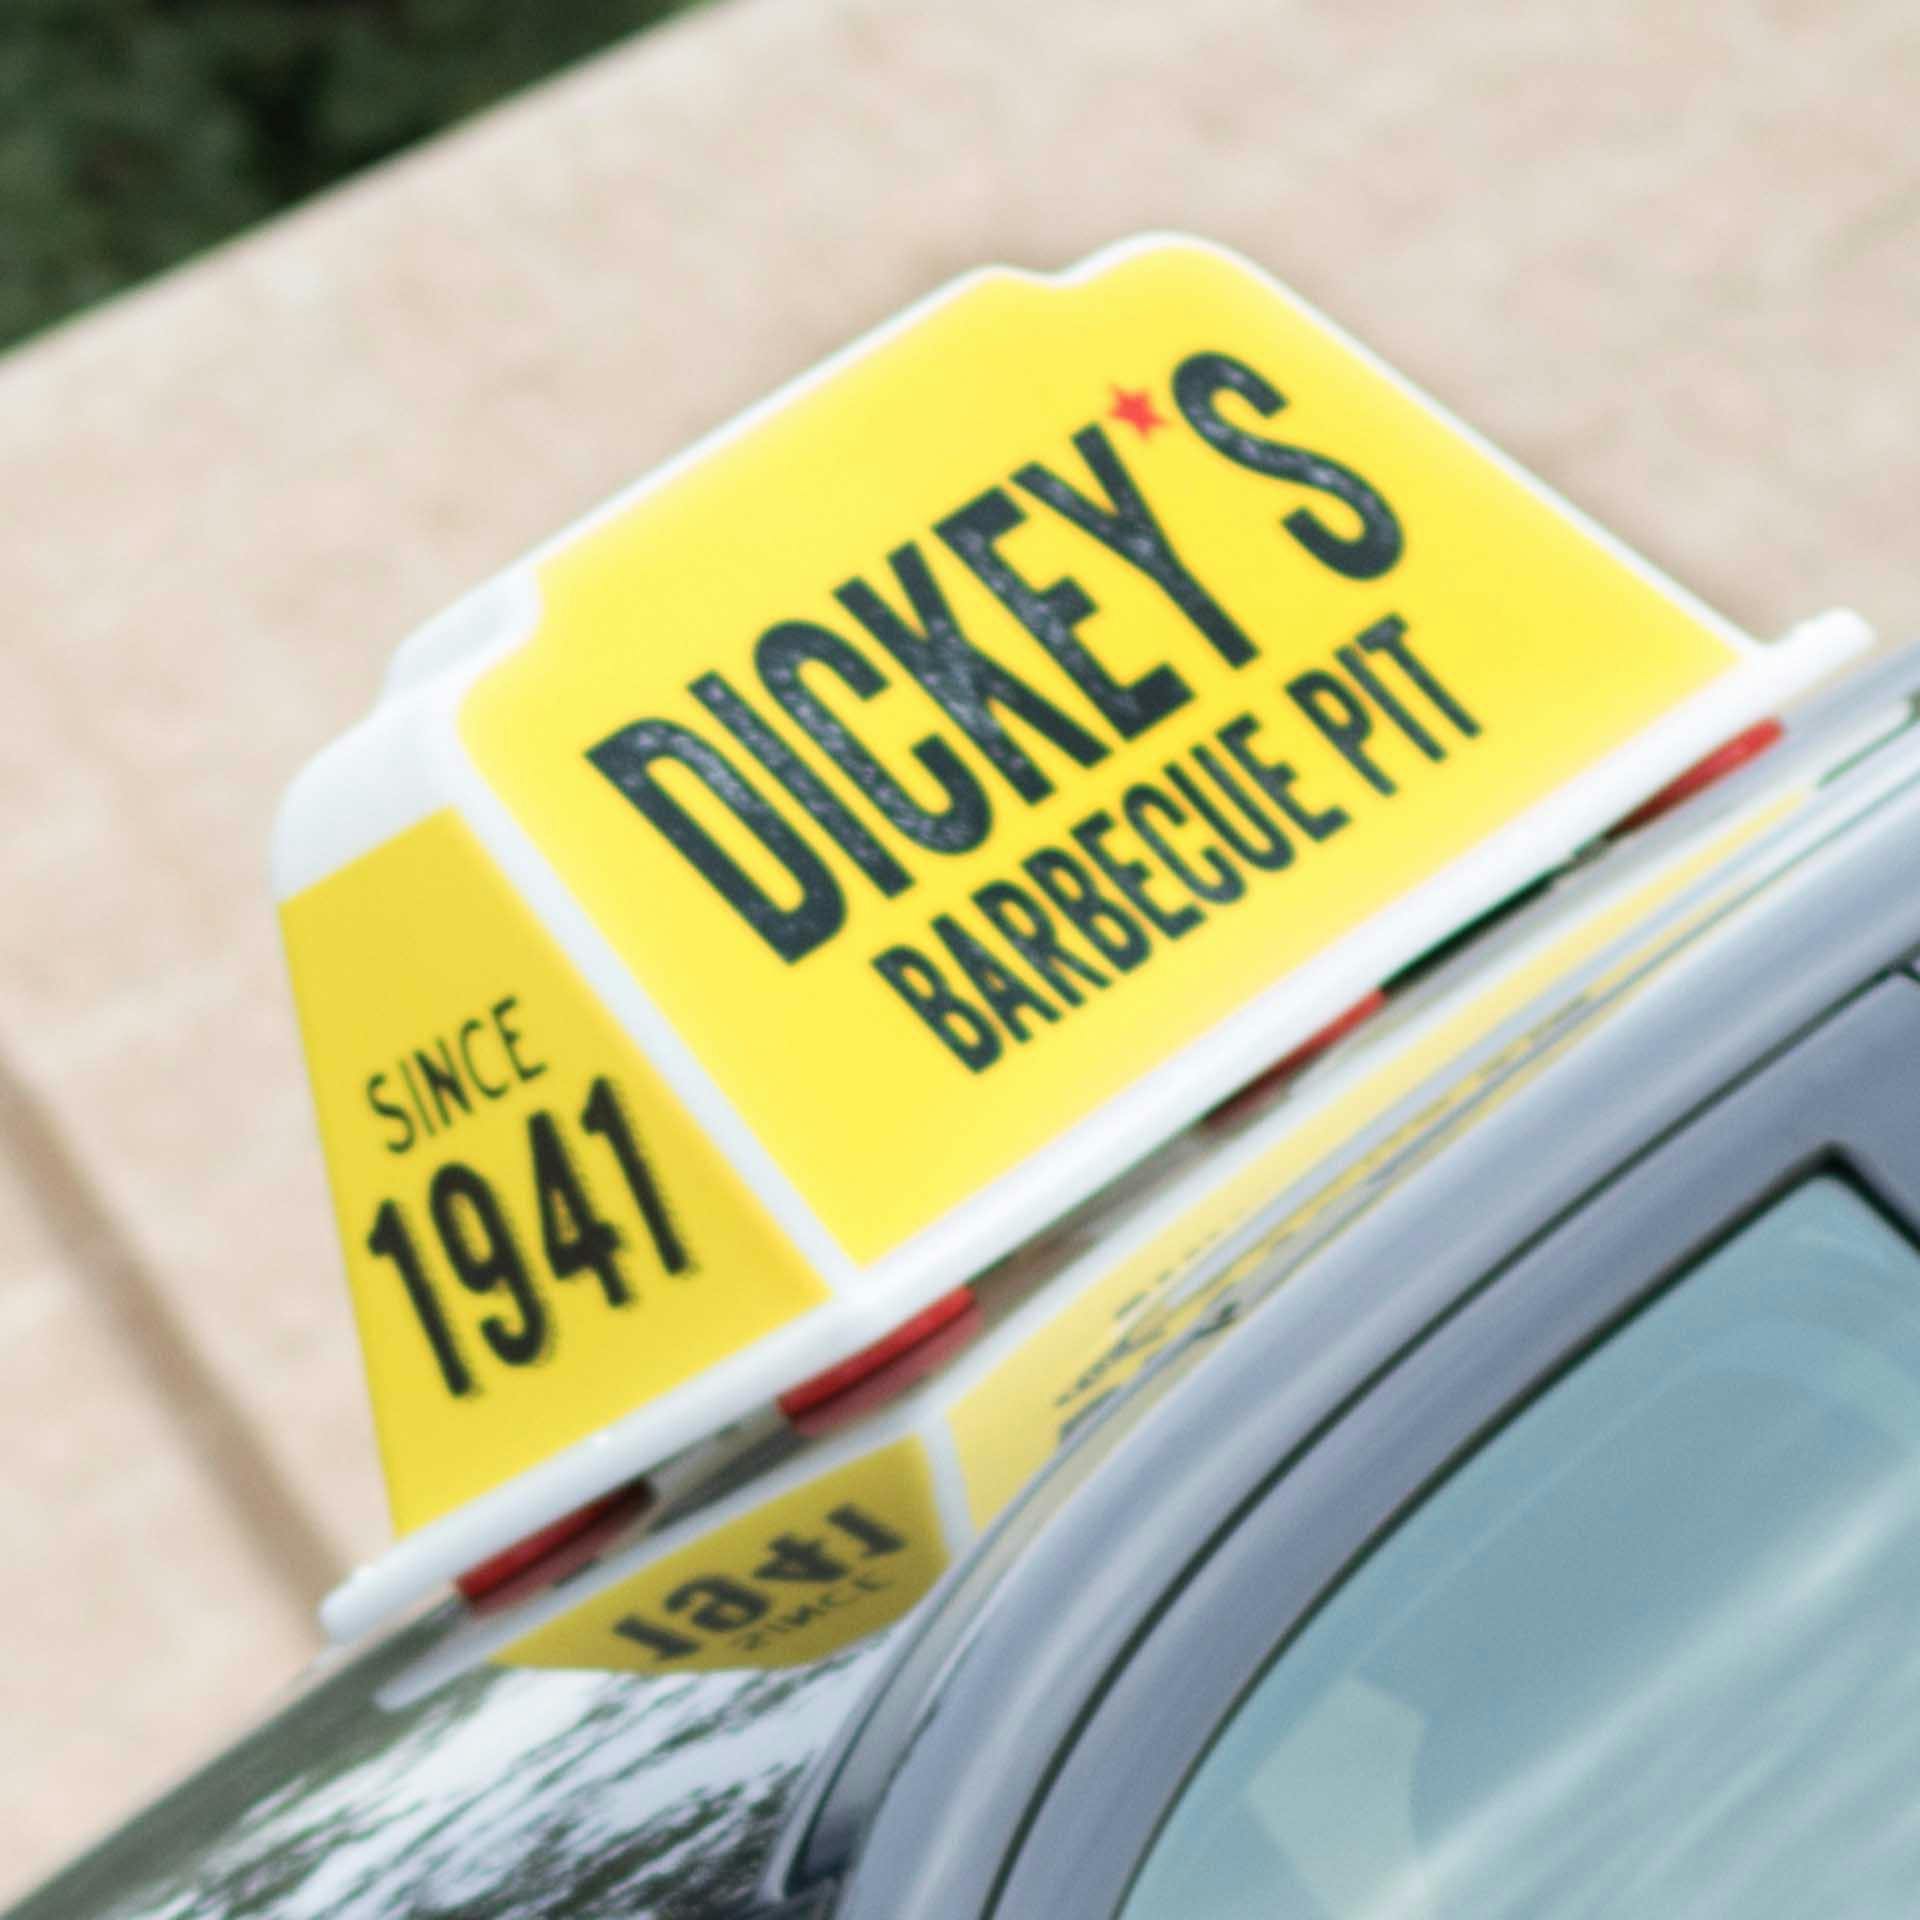 Hospitality Technology: Dickey’s Barbecue Pit Offers Free Delivery Through March